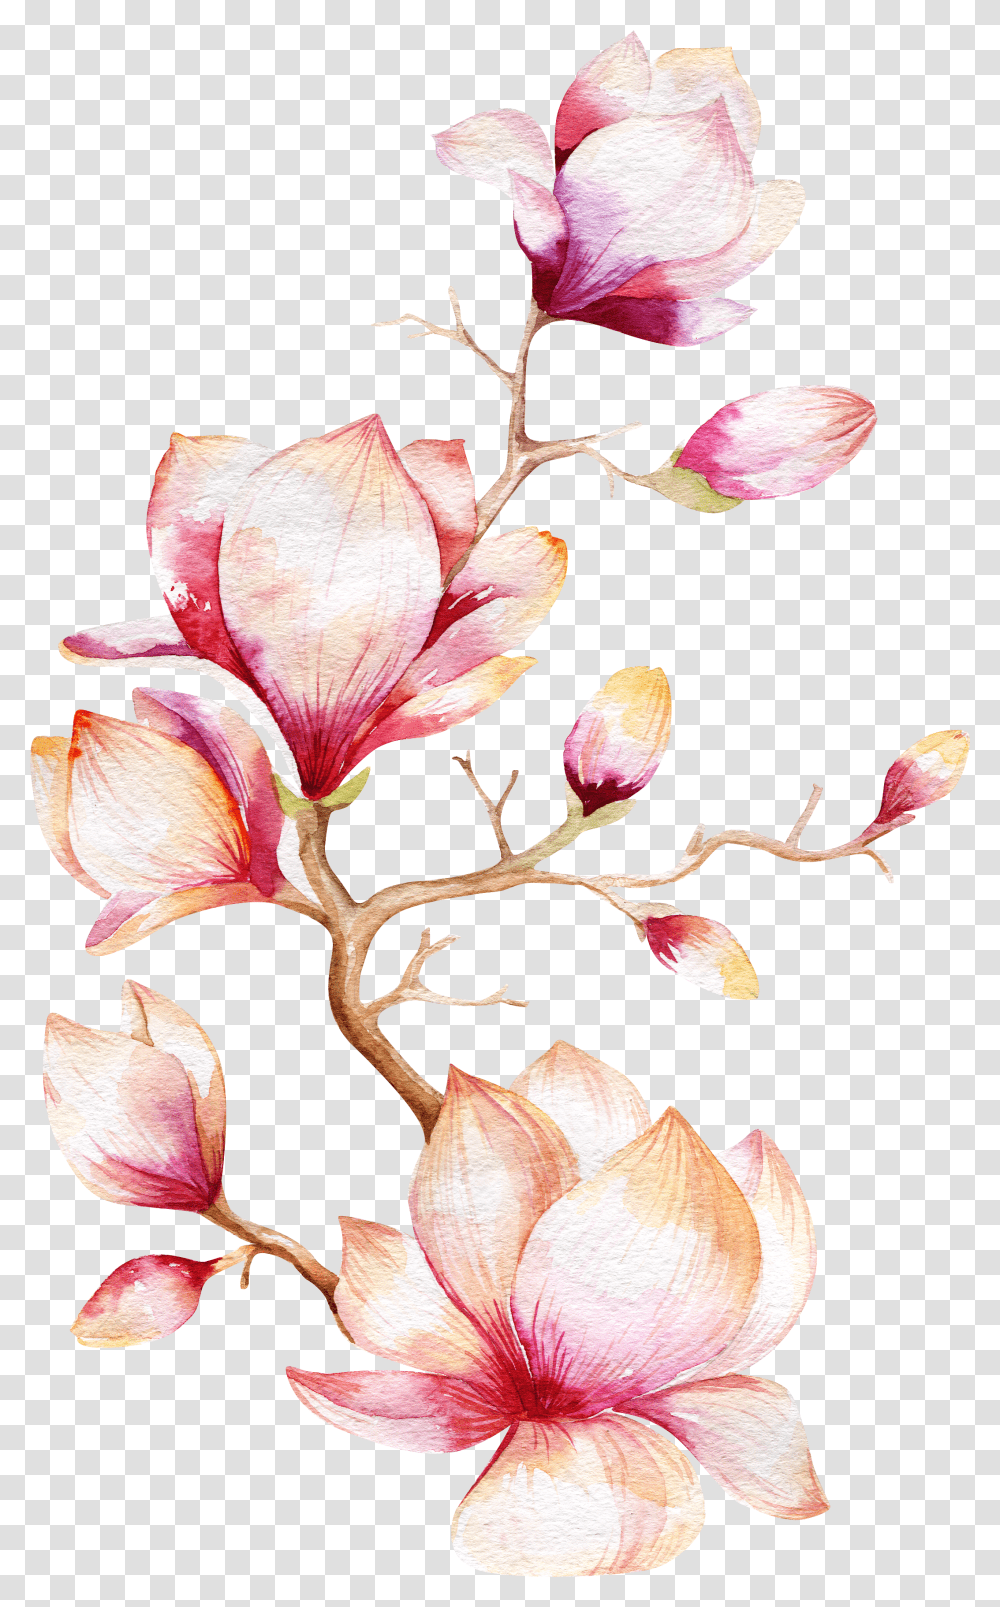 Magnolia Tree Watercolor Painting Black And White Watercolor Flowers Transparent Png